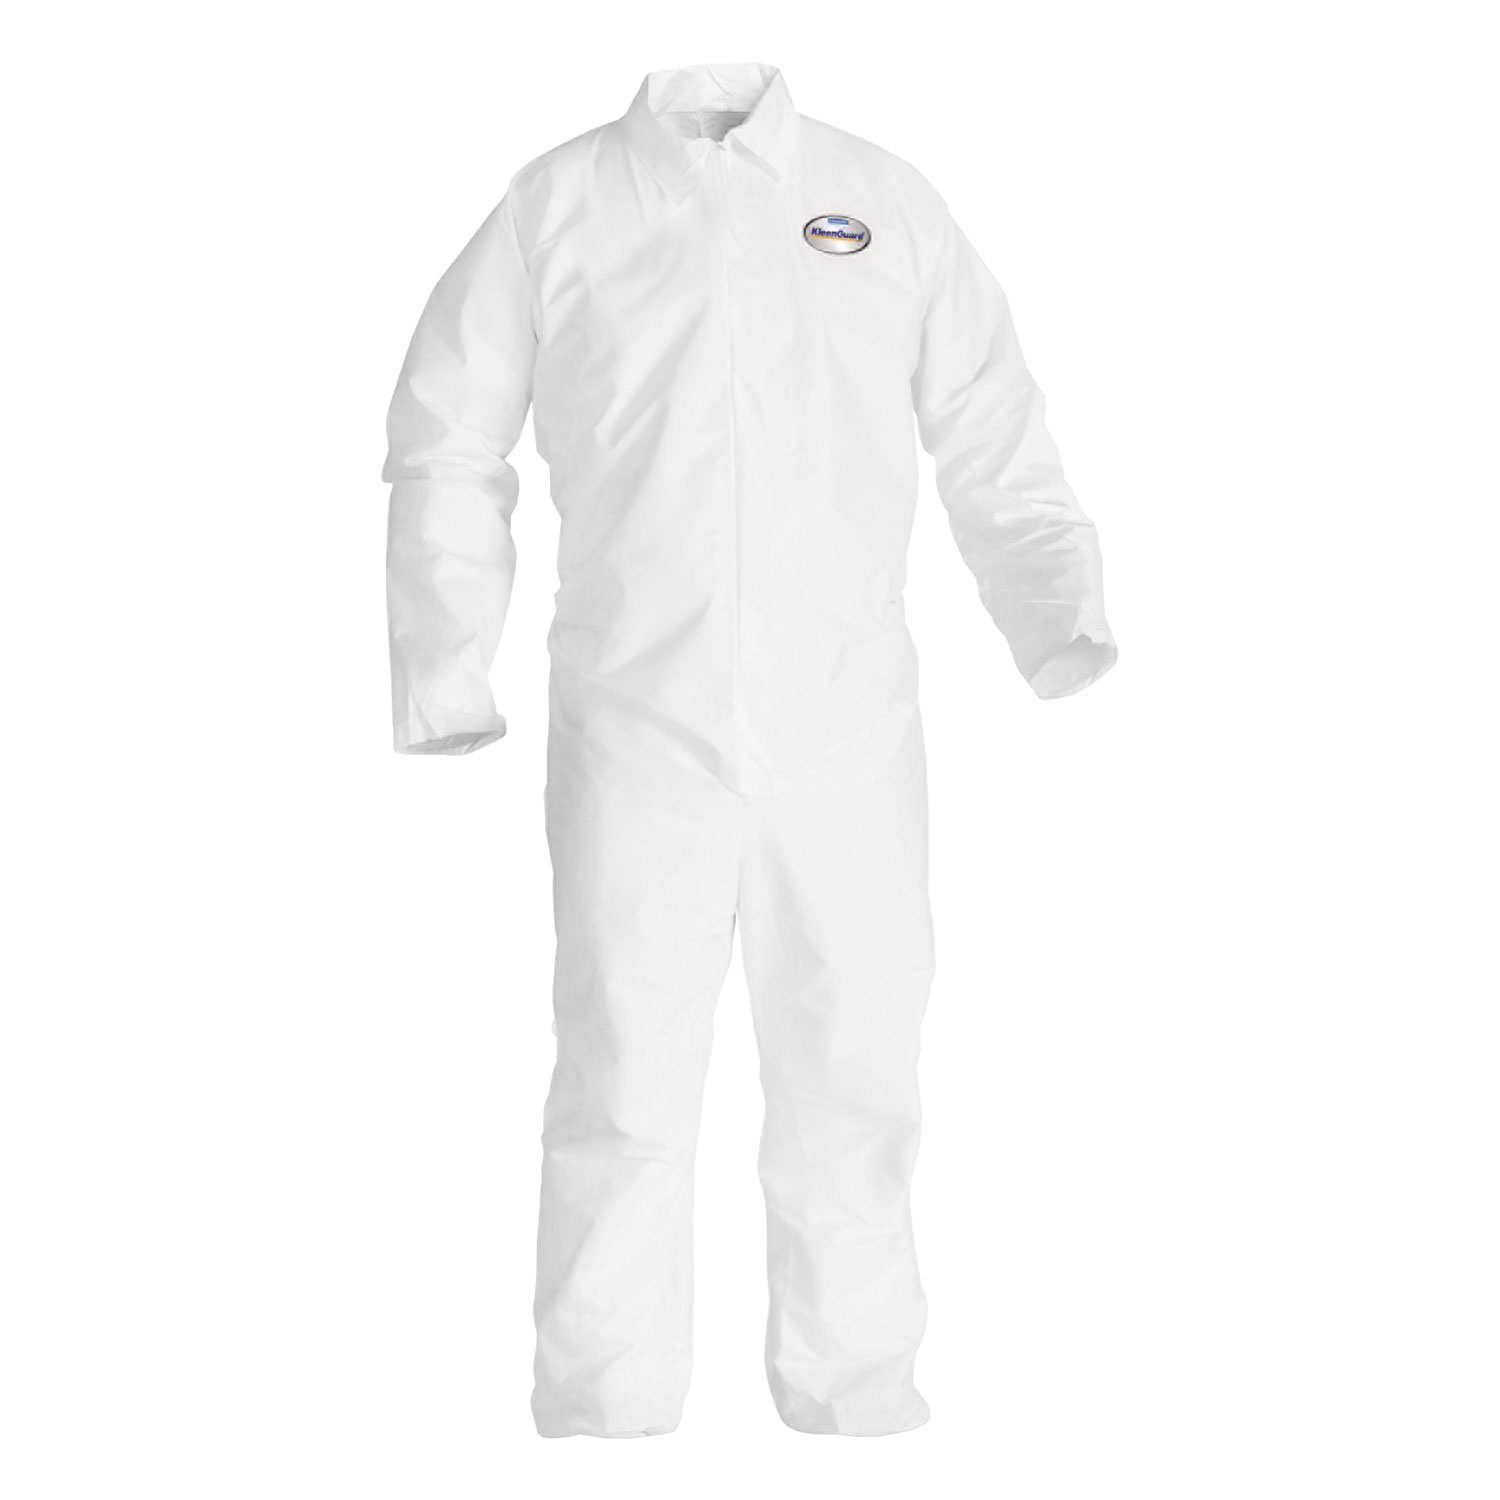 BP A20 Coveralls, MICROFORCE Barrier SMS Fabric, White, Large, 24/Carton